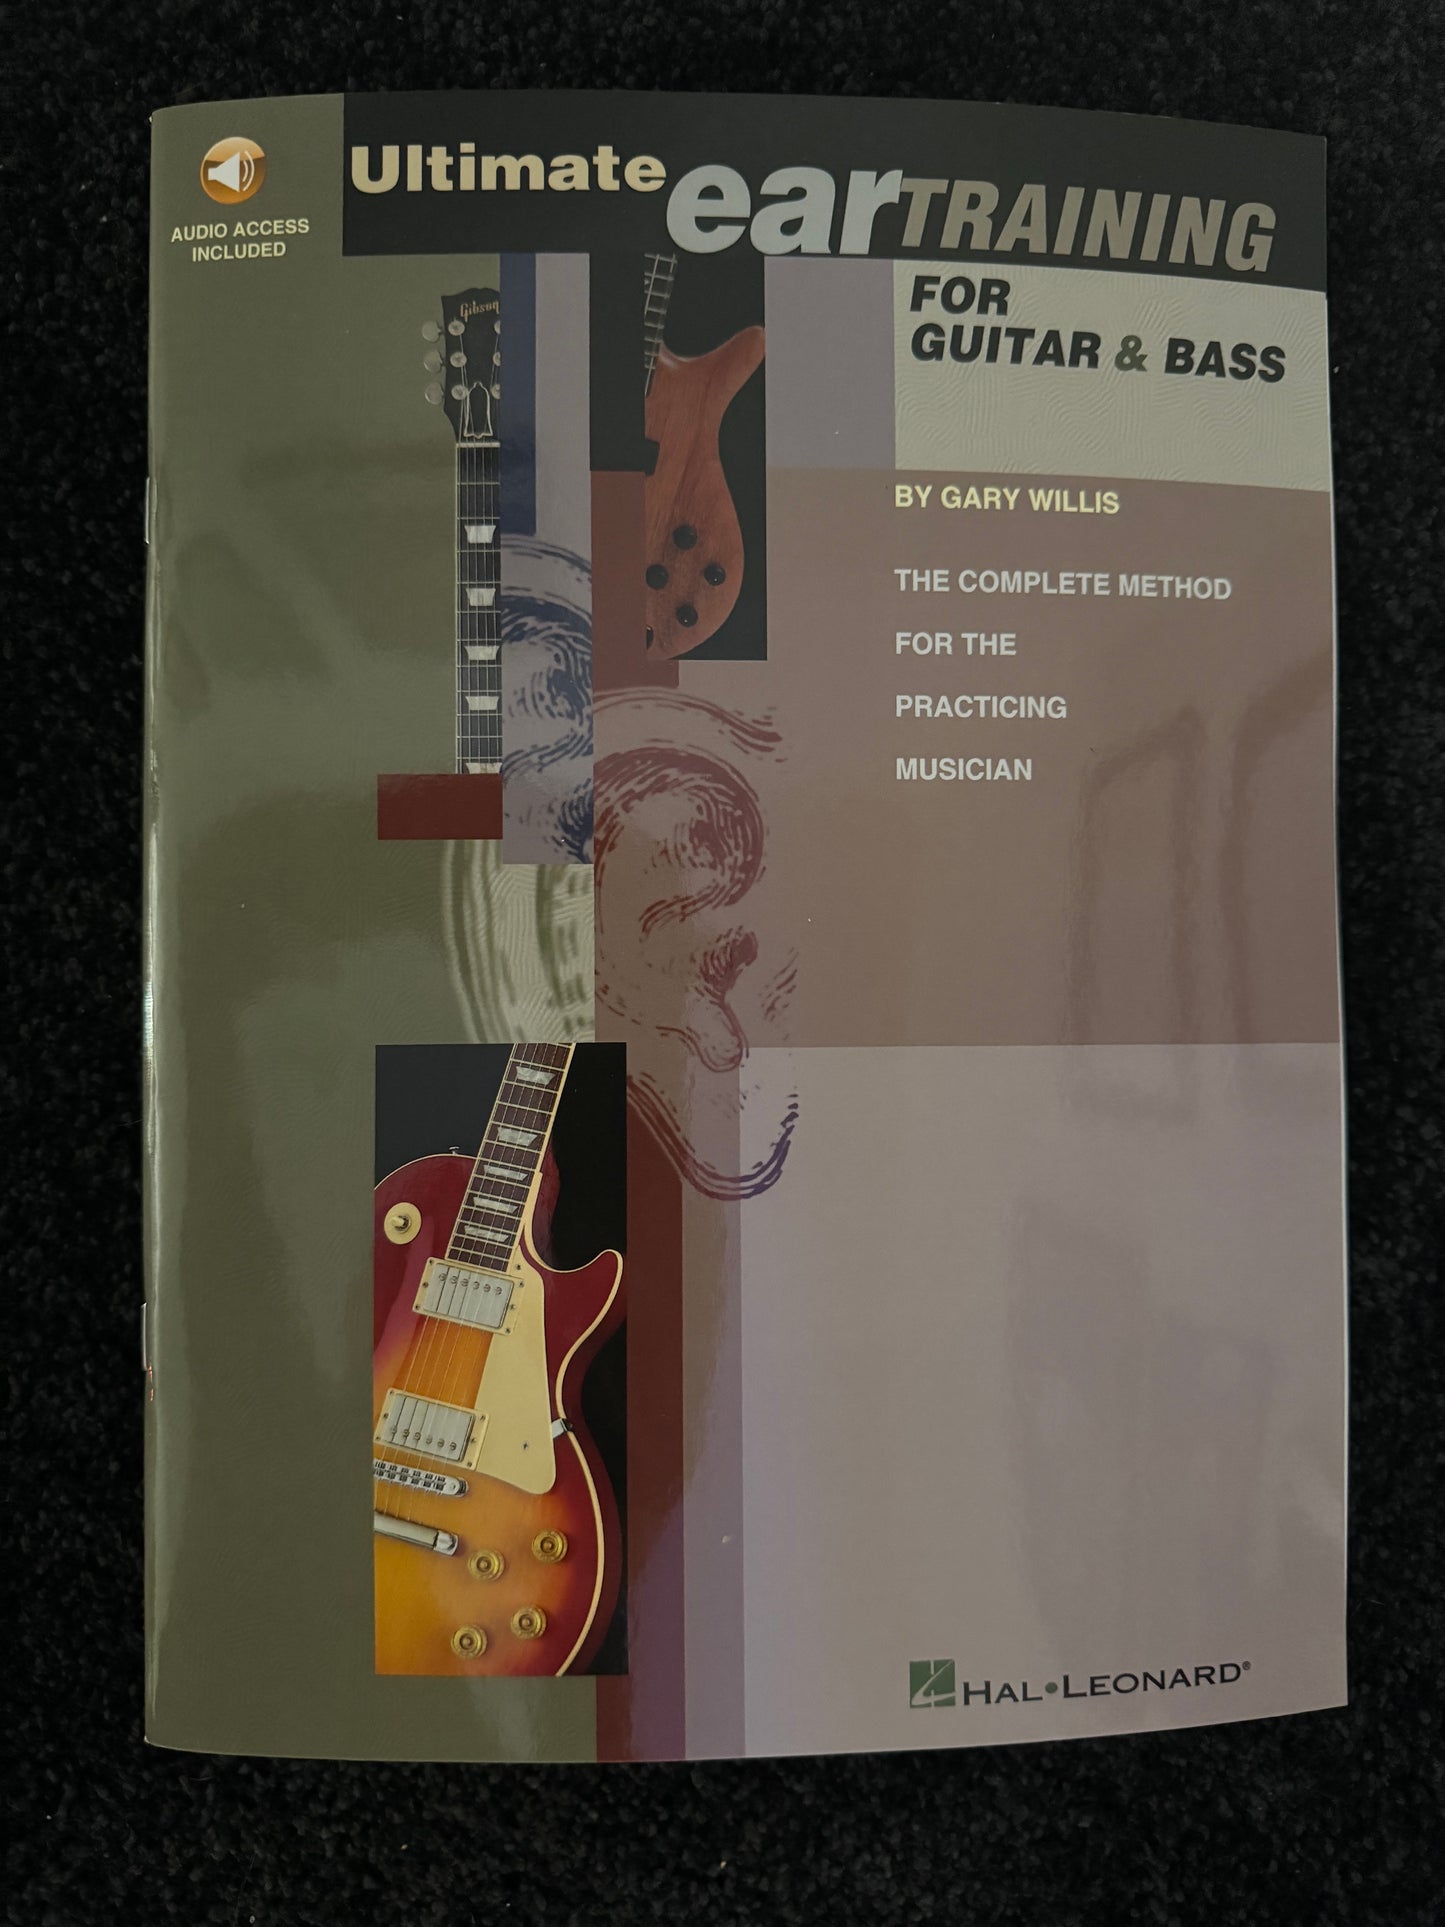 Ultimate Ear Training For Guitar And Bass by Gary Willis